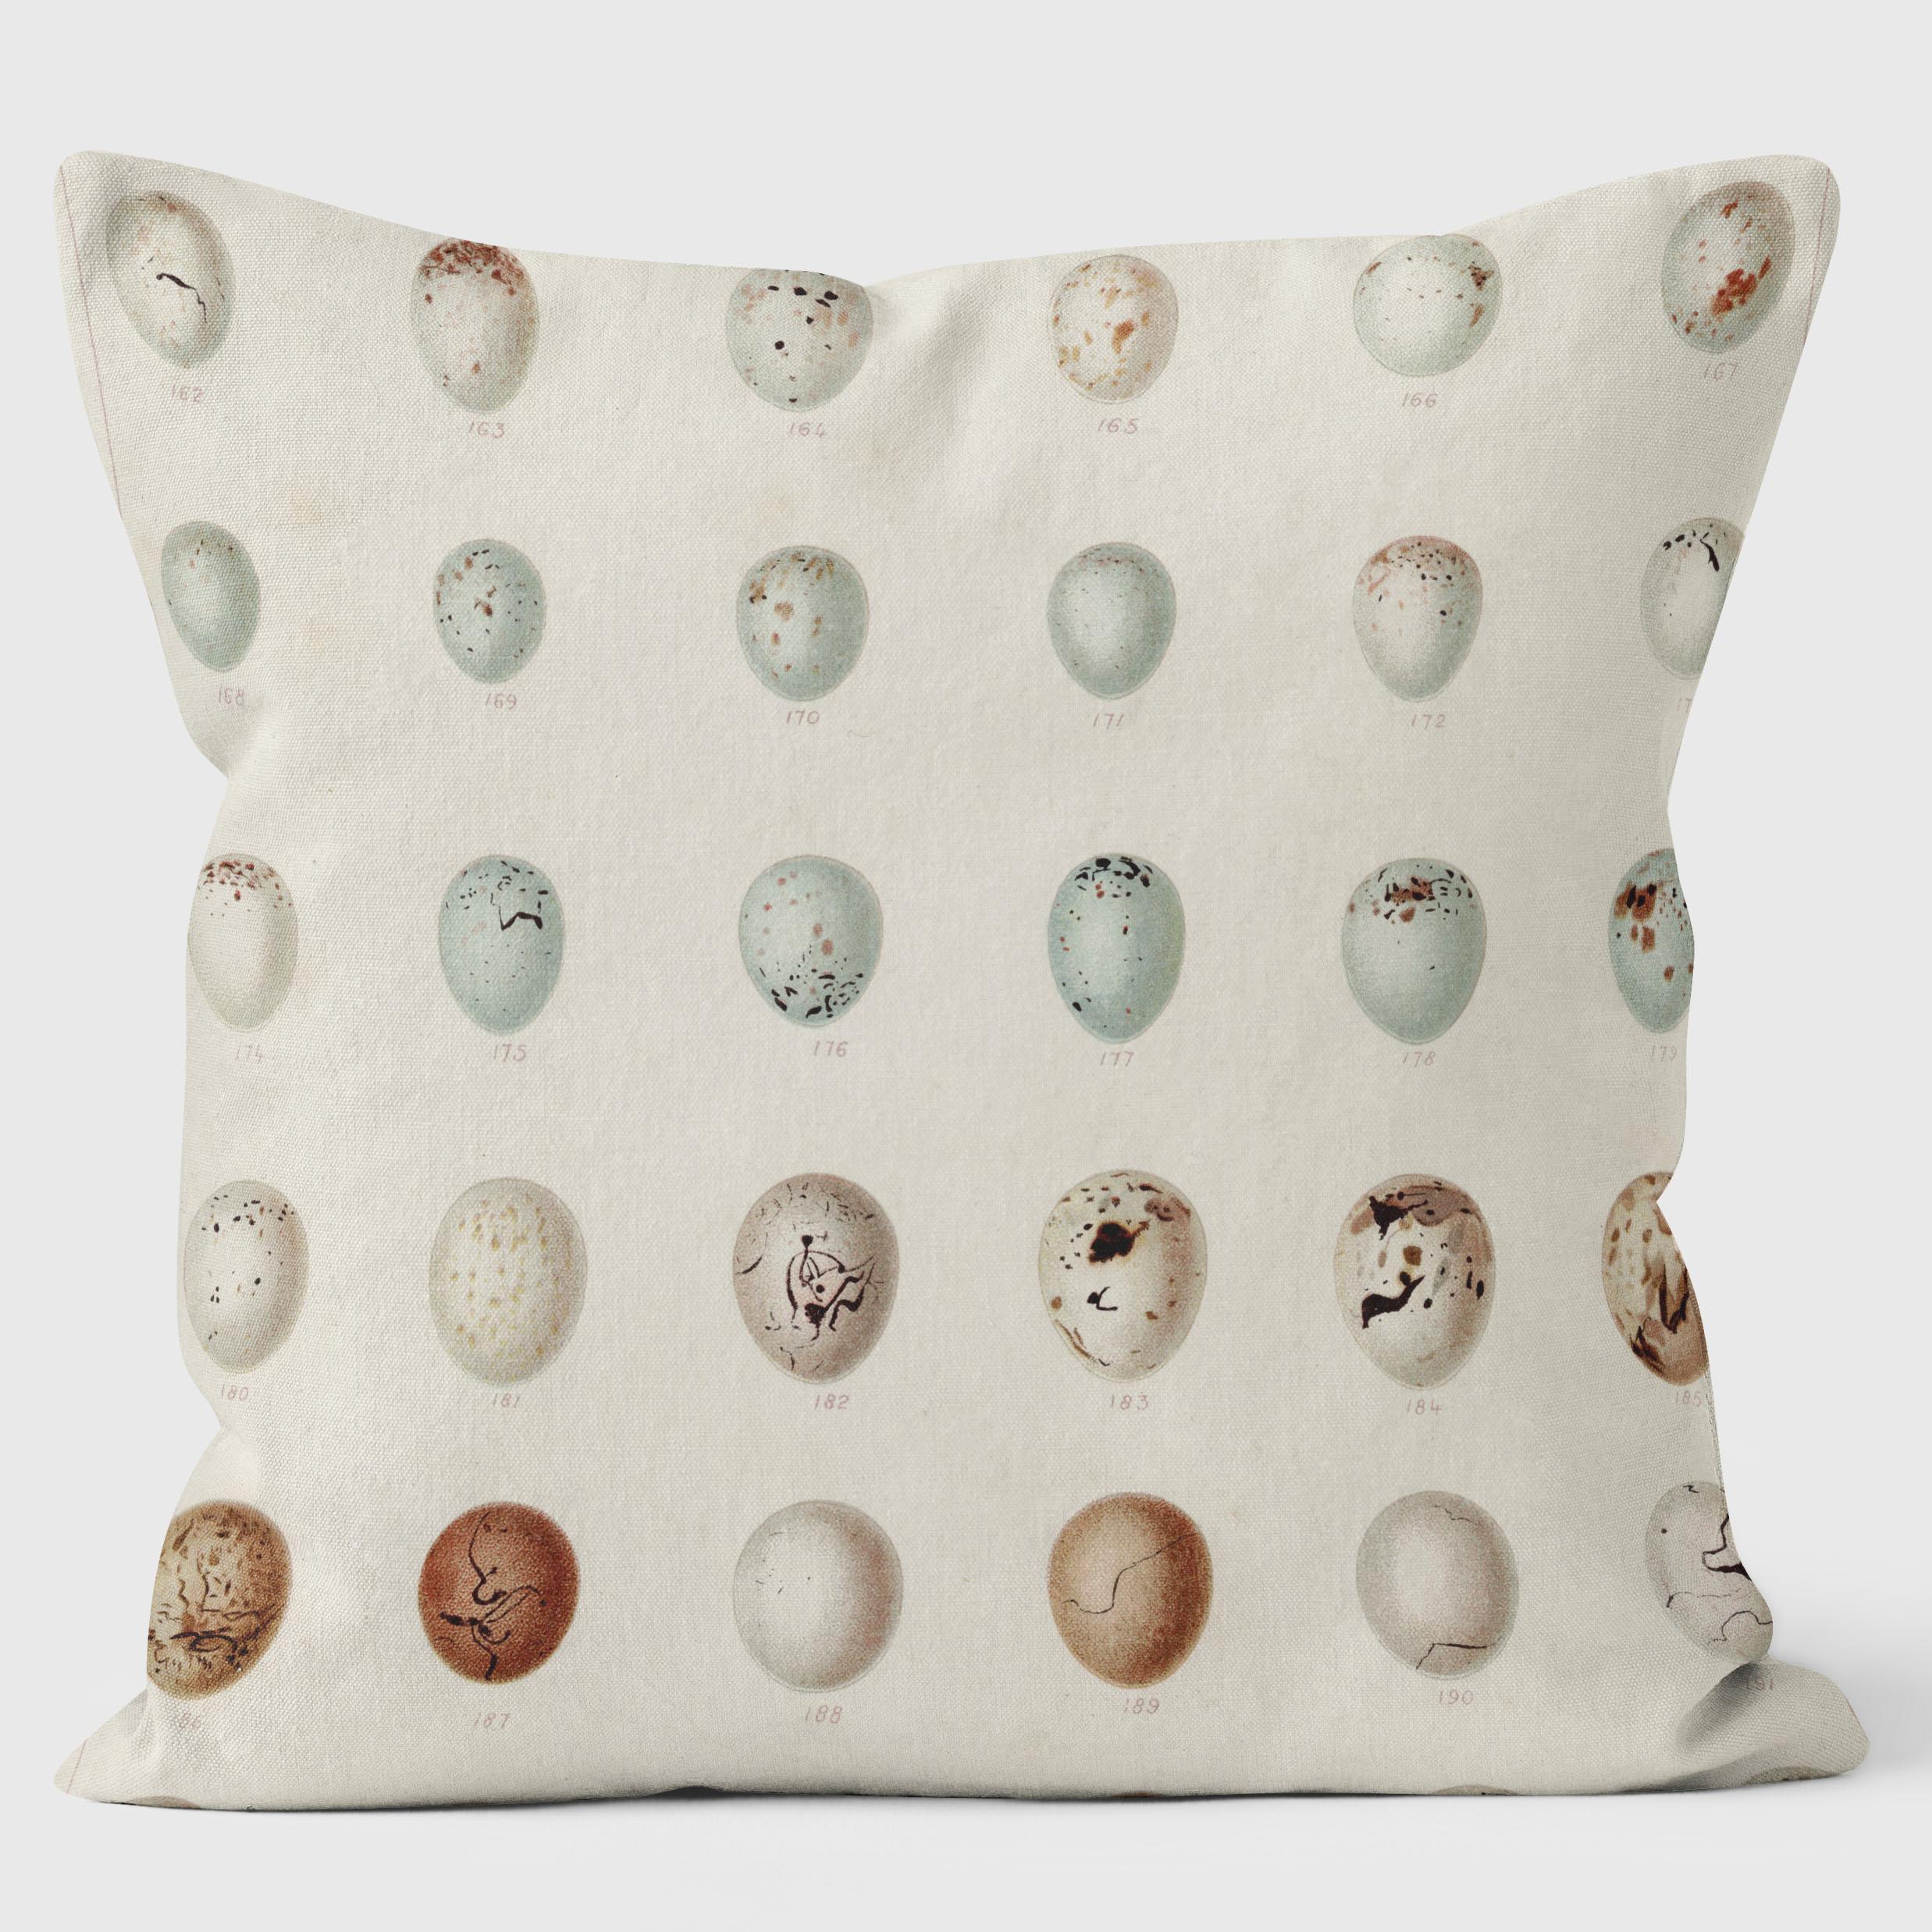 Rows of Eggs - Special Occasions Cushion - Handmade Cushions UK - WeLoveCushions